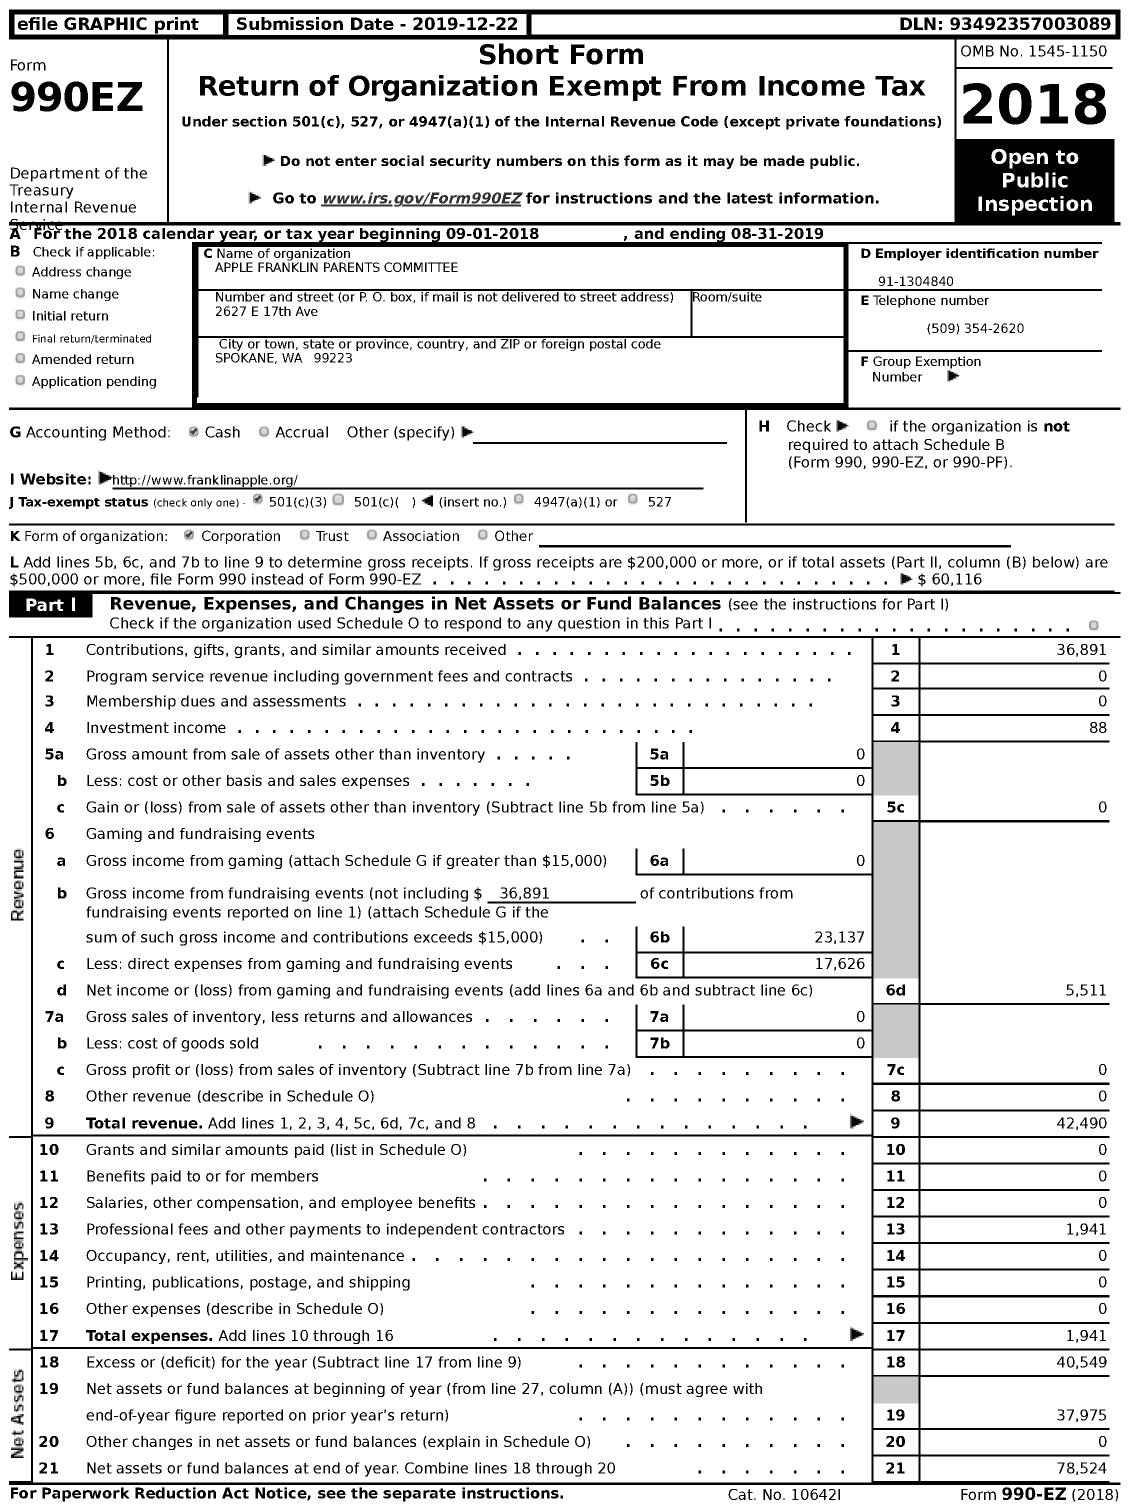 Image of first page of 2018 Form 990EZ for Apple Franklin Parents Committee